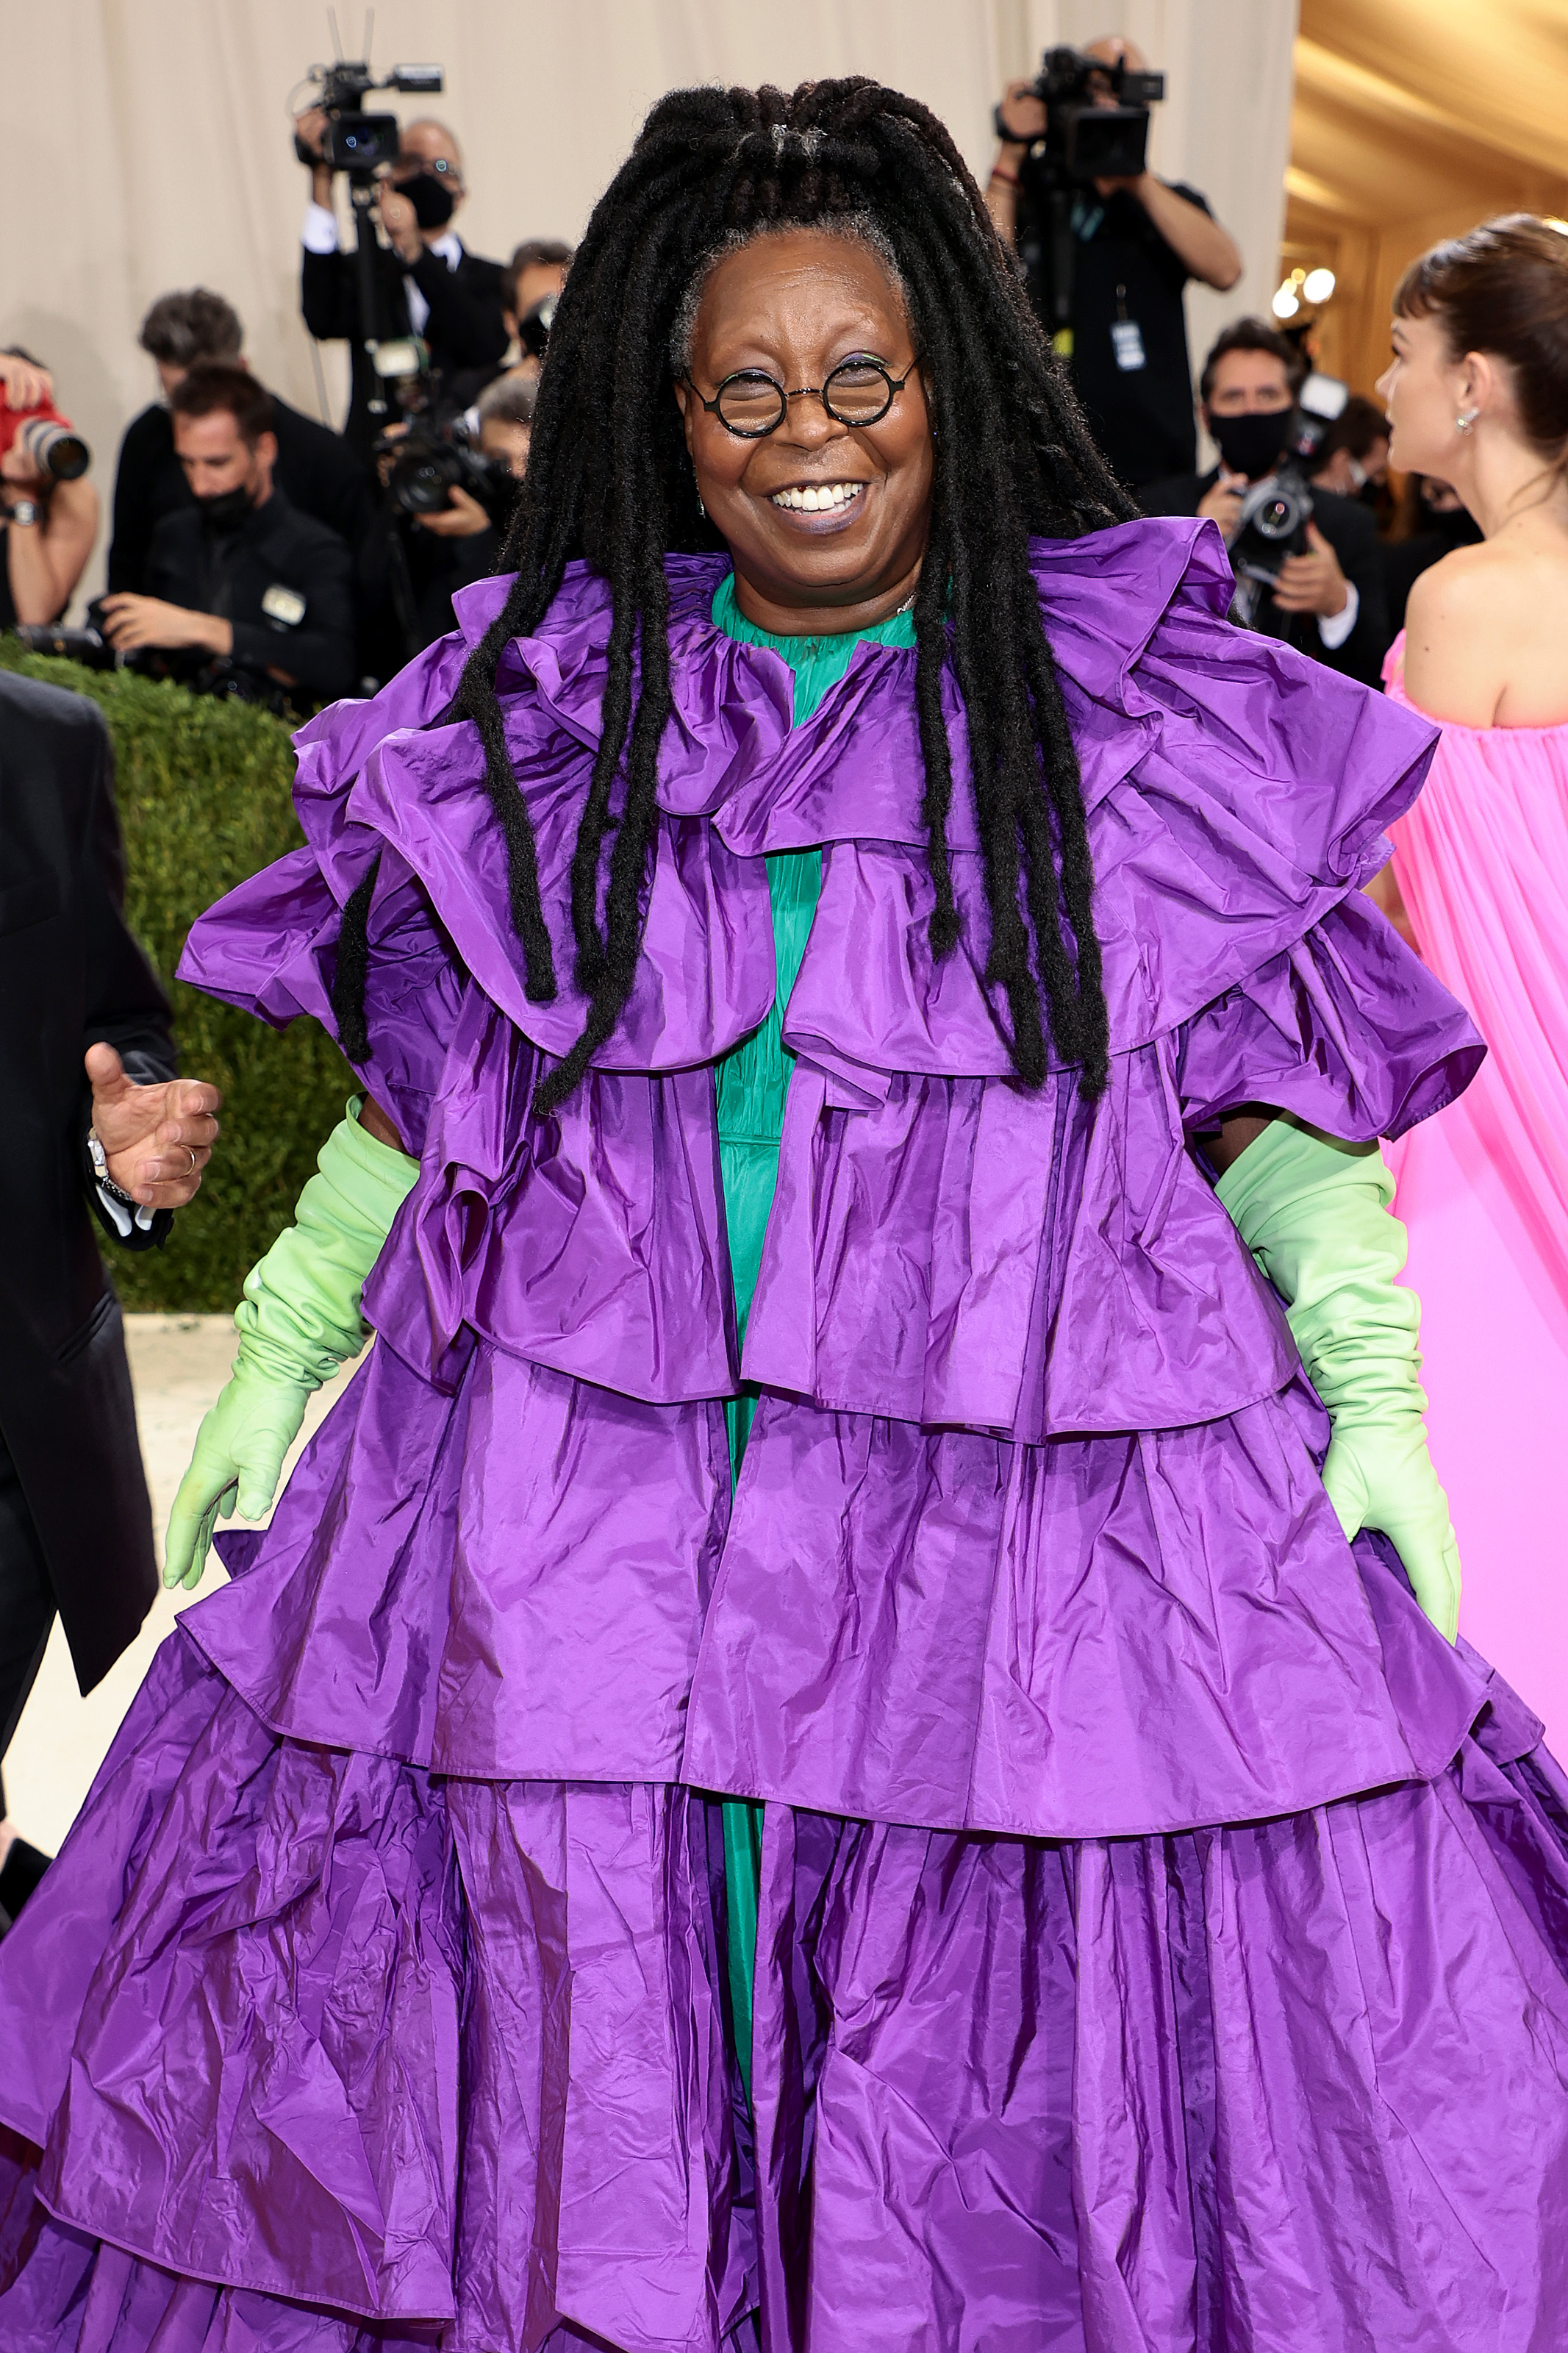 Whoopi Goldberg attends The 2021 Met Gala Celebrating In America: A Lexicon Of Fashion at the Metropolitan Museum of Art on September 13, 2021, in New York City. | Source: Getty Images